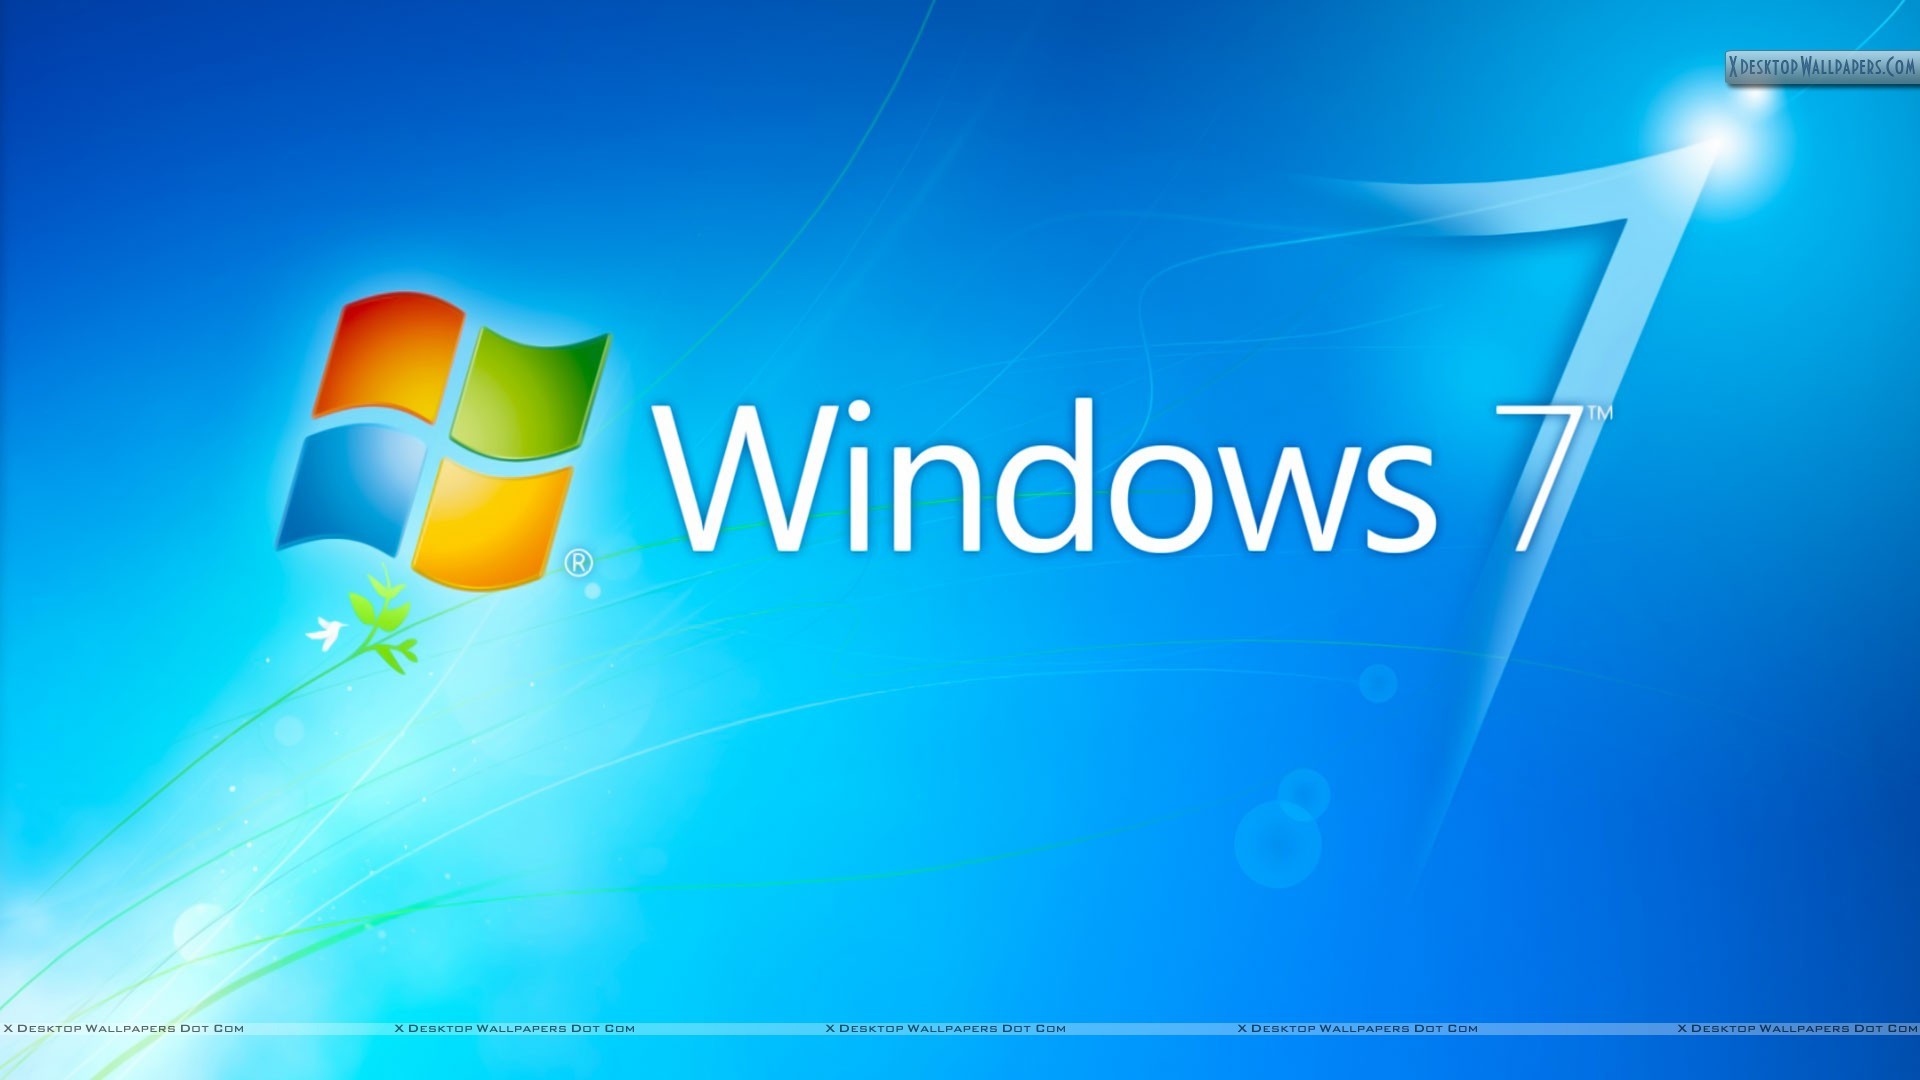 1920x1080 You are viewing wallpaper titled "Windows 7 ...